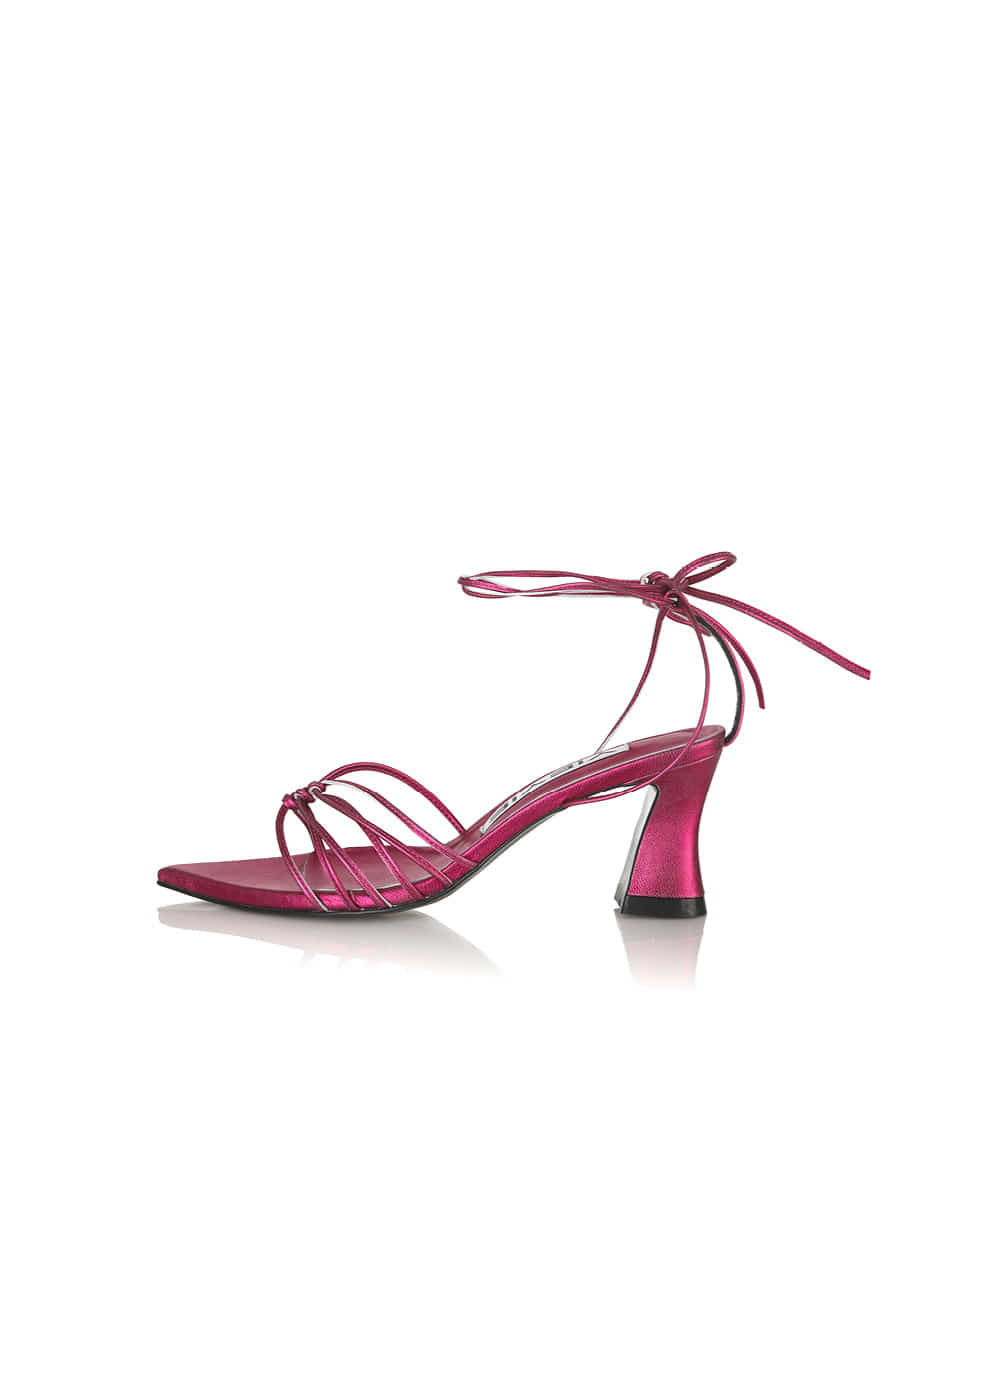 Y.09 Lucy Lace-Up Slingbacks / Y.09-S89 / 4 colors